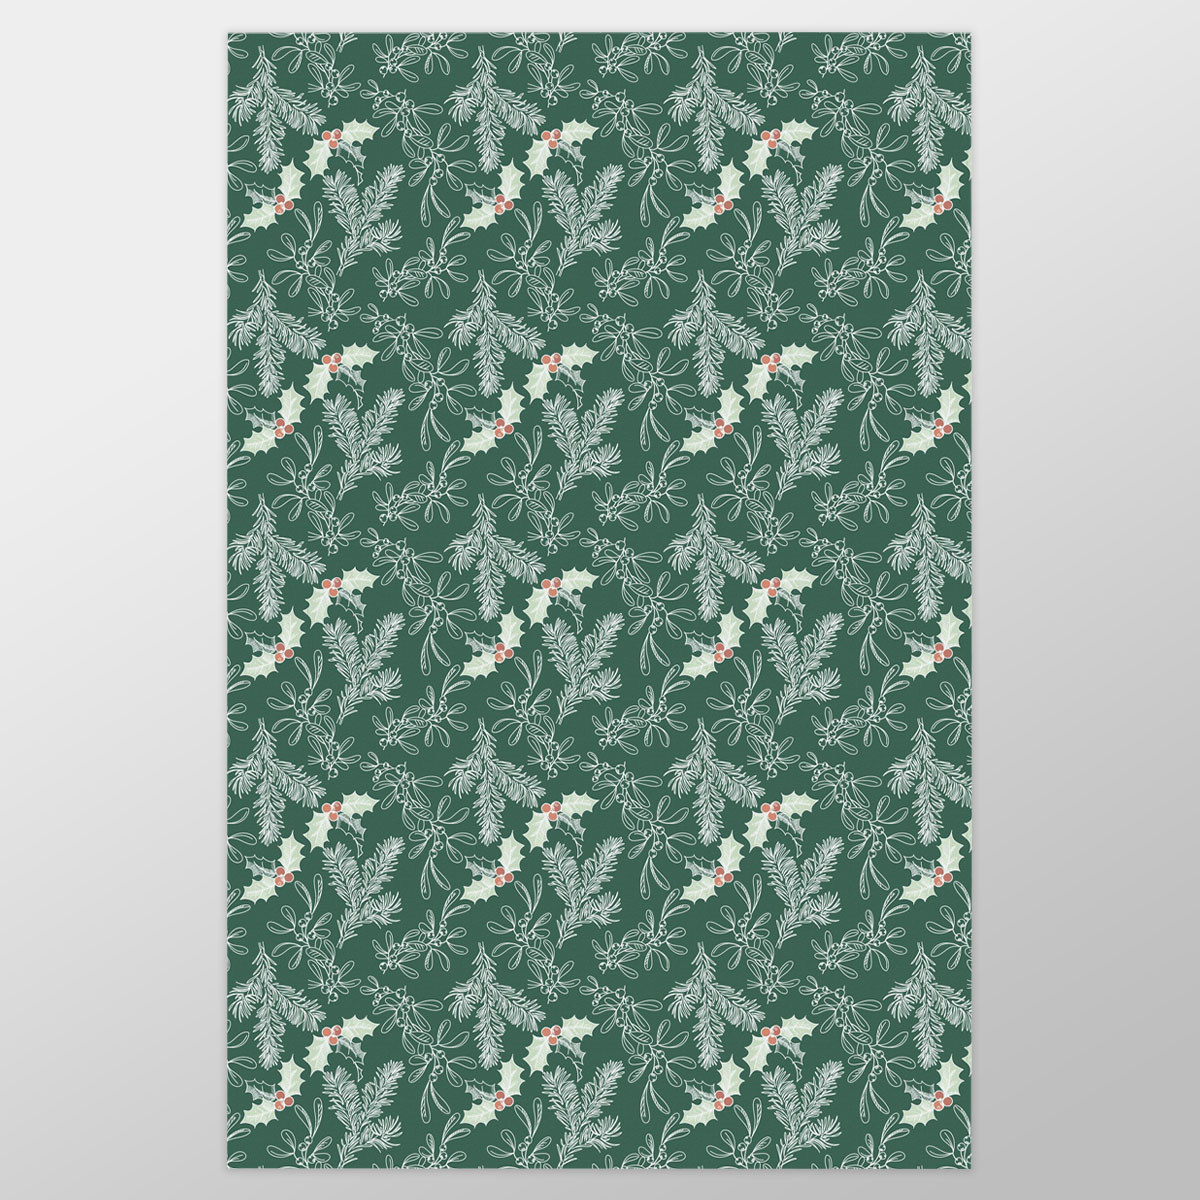 Holly Leaf, Christmas Mistletoe And Pine Tree Branche Wrapping Paper